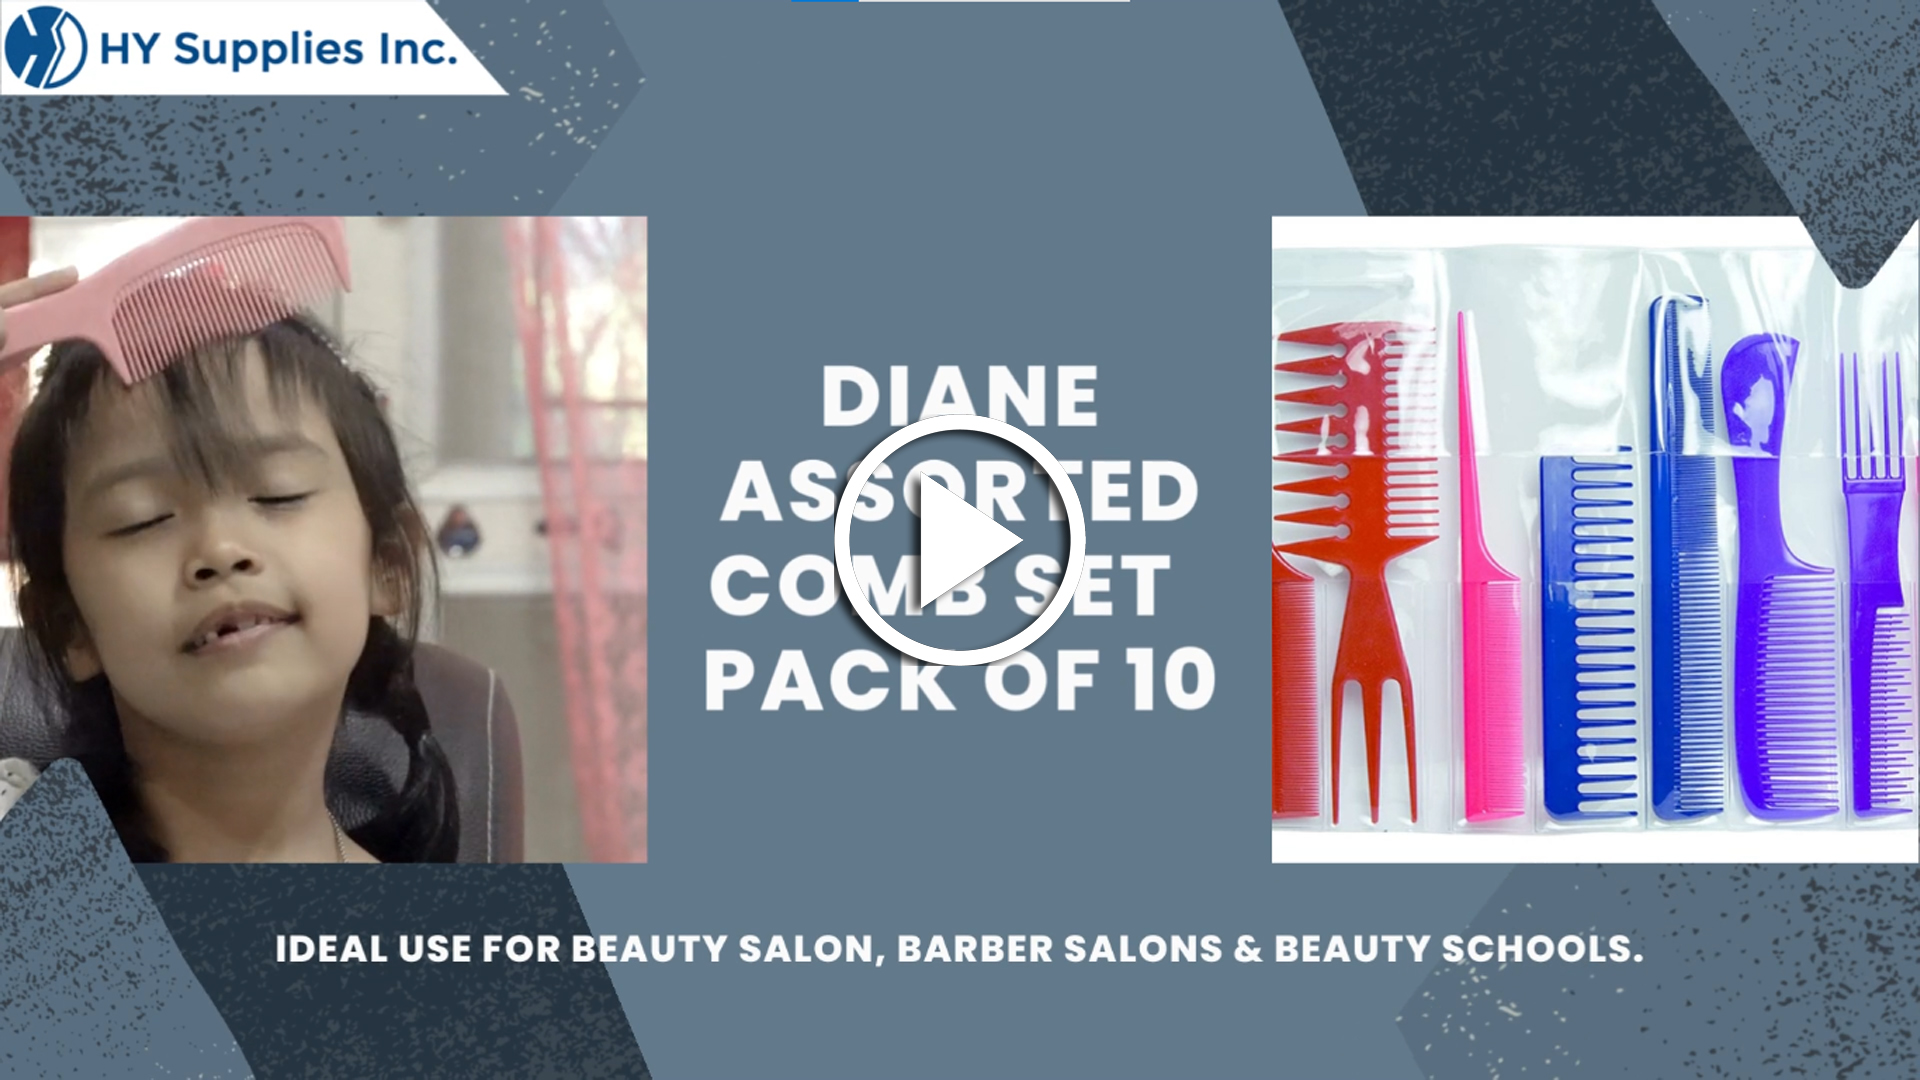 Diane Assorted Comb Set - Pack of 10